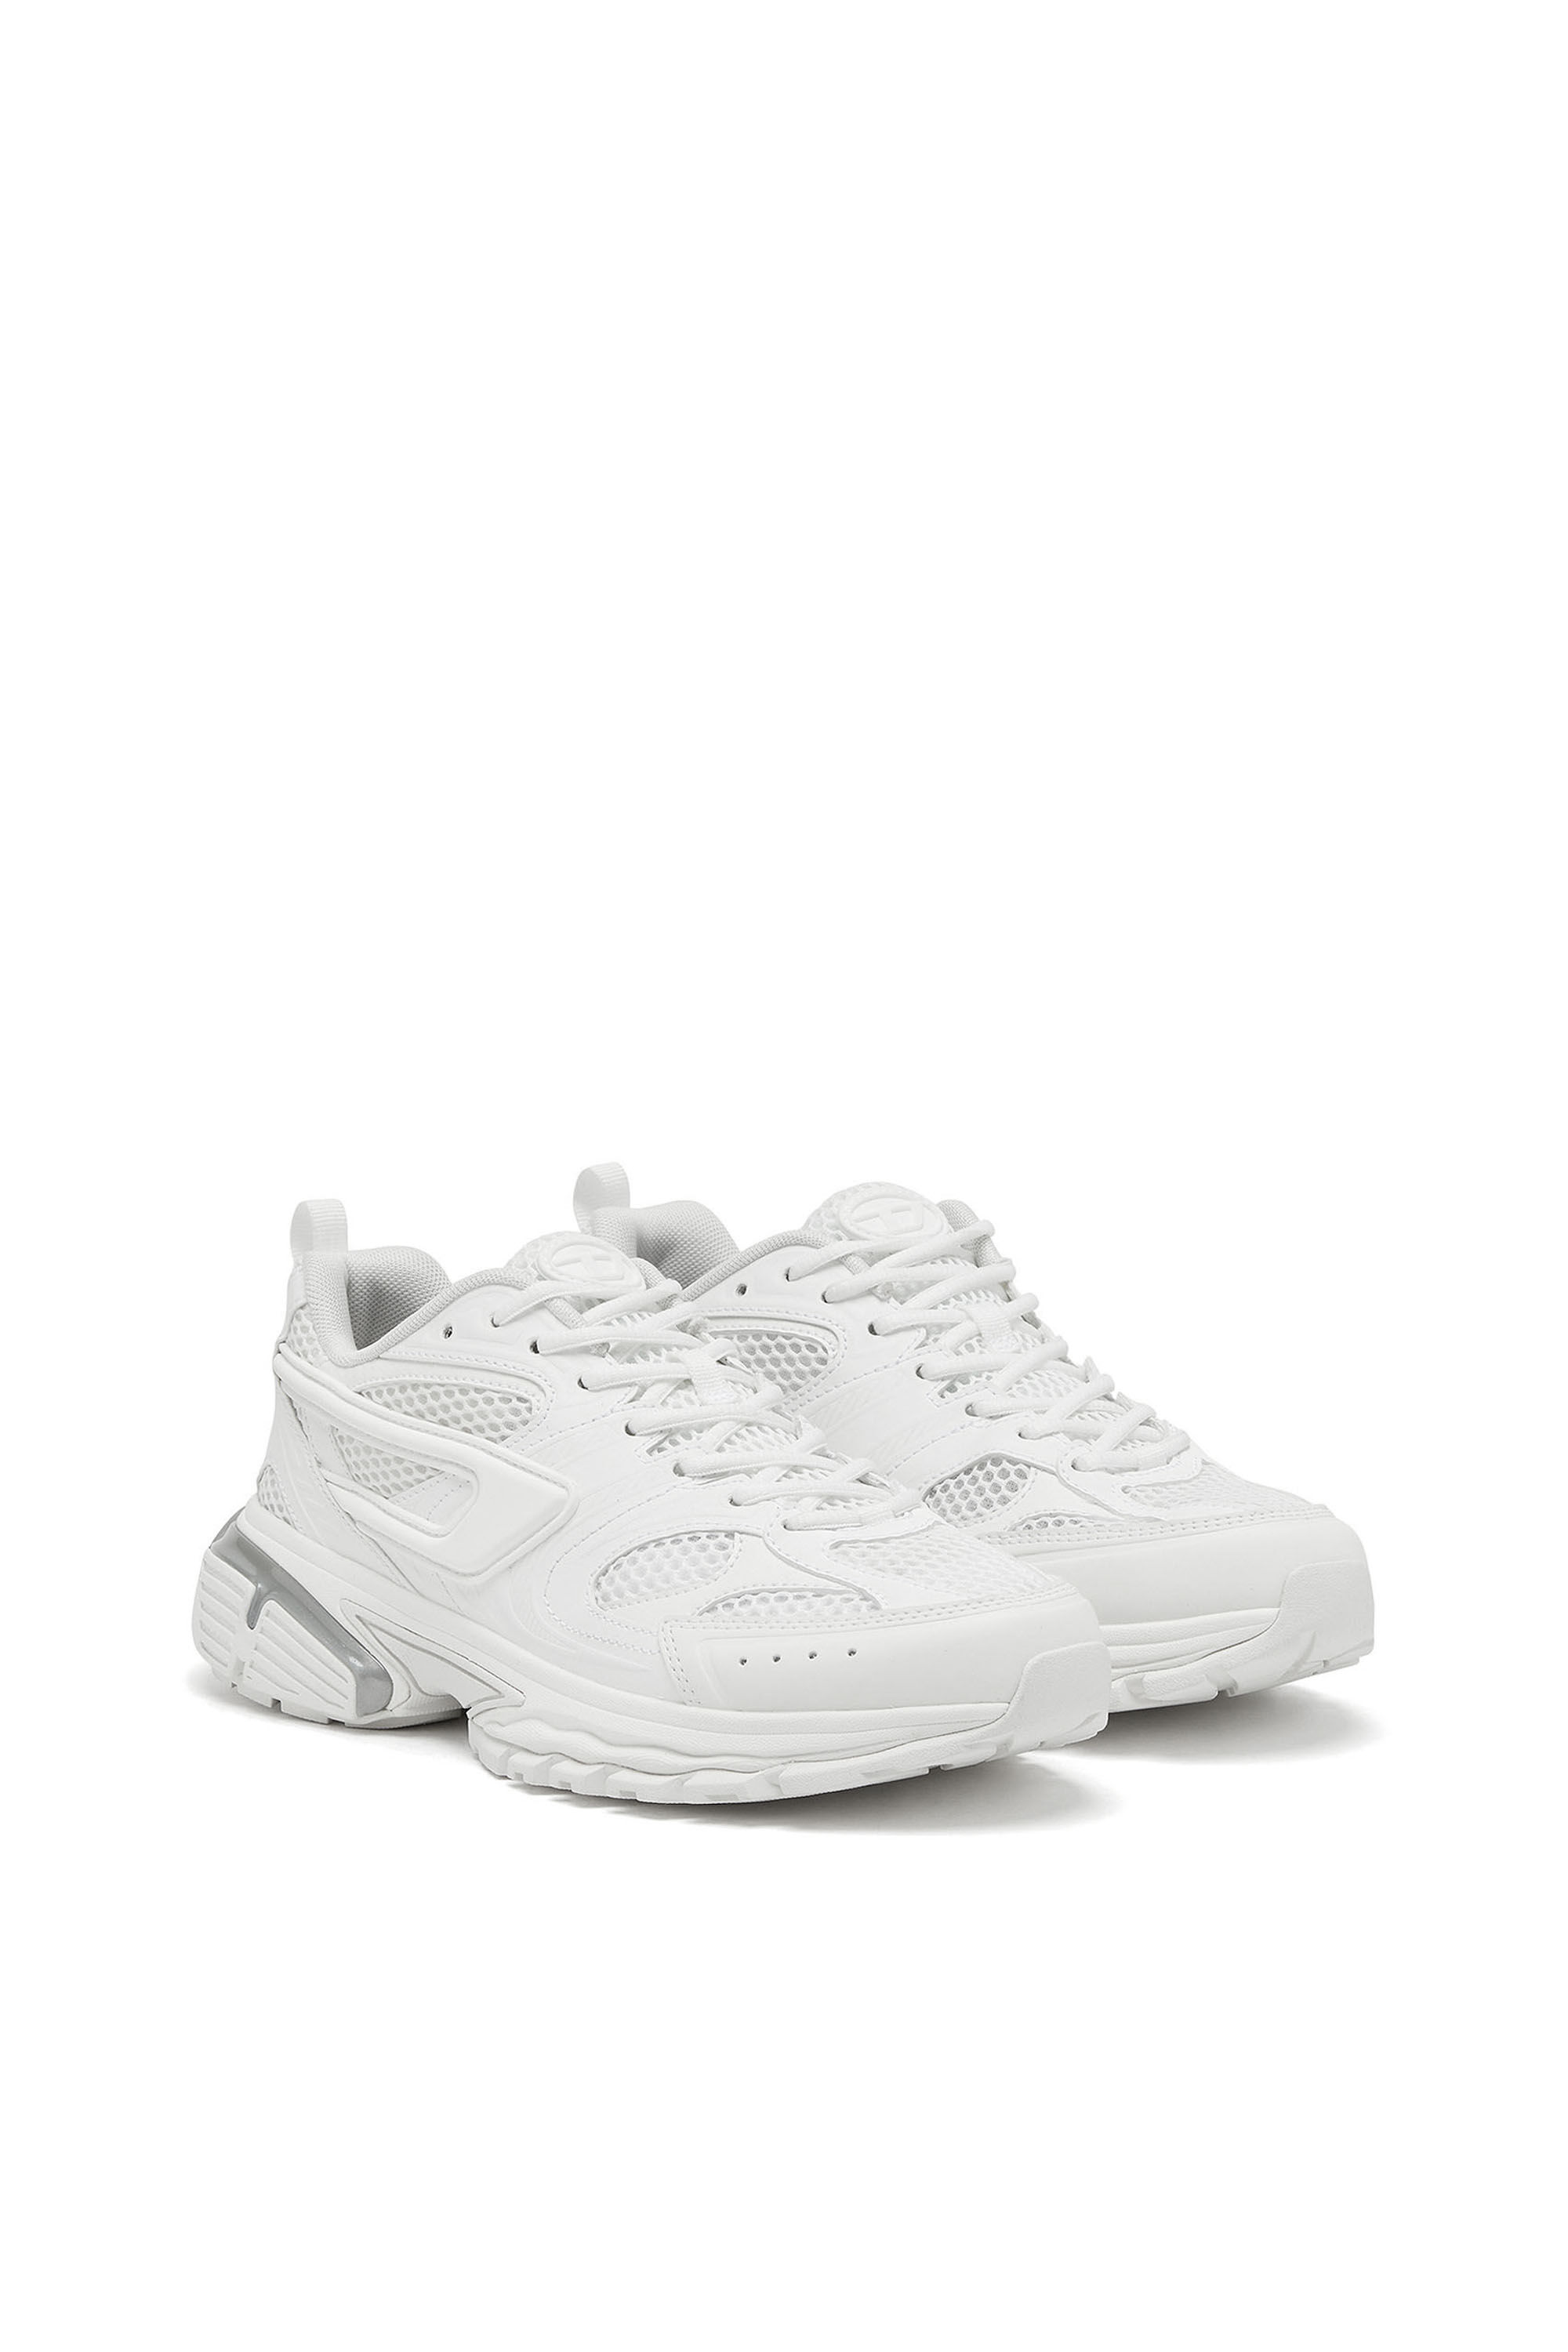 Diesel - S-SERENDIPITY PRO-X1, Man S-Serendipity-Monochrome sneakers in mesh and PU in White - Image 2